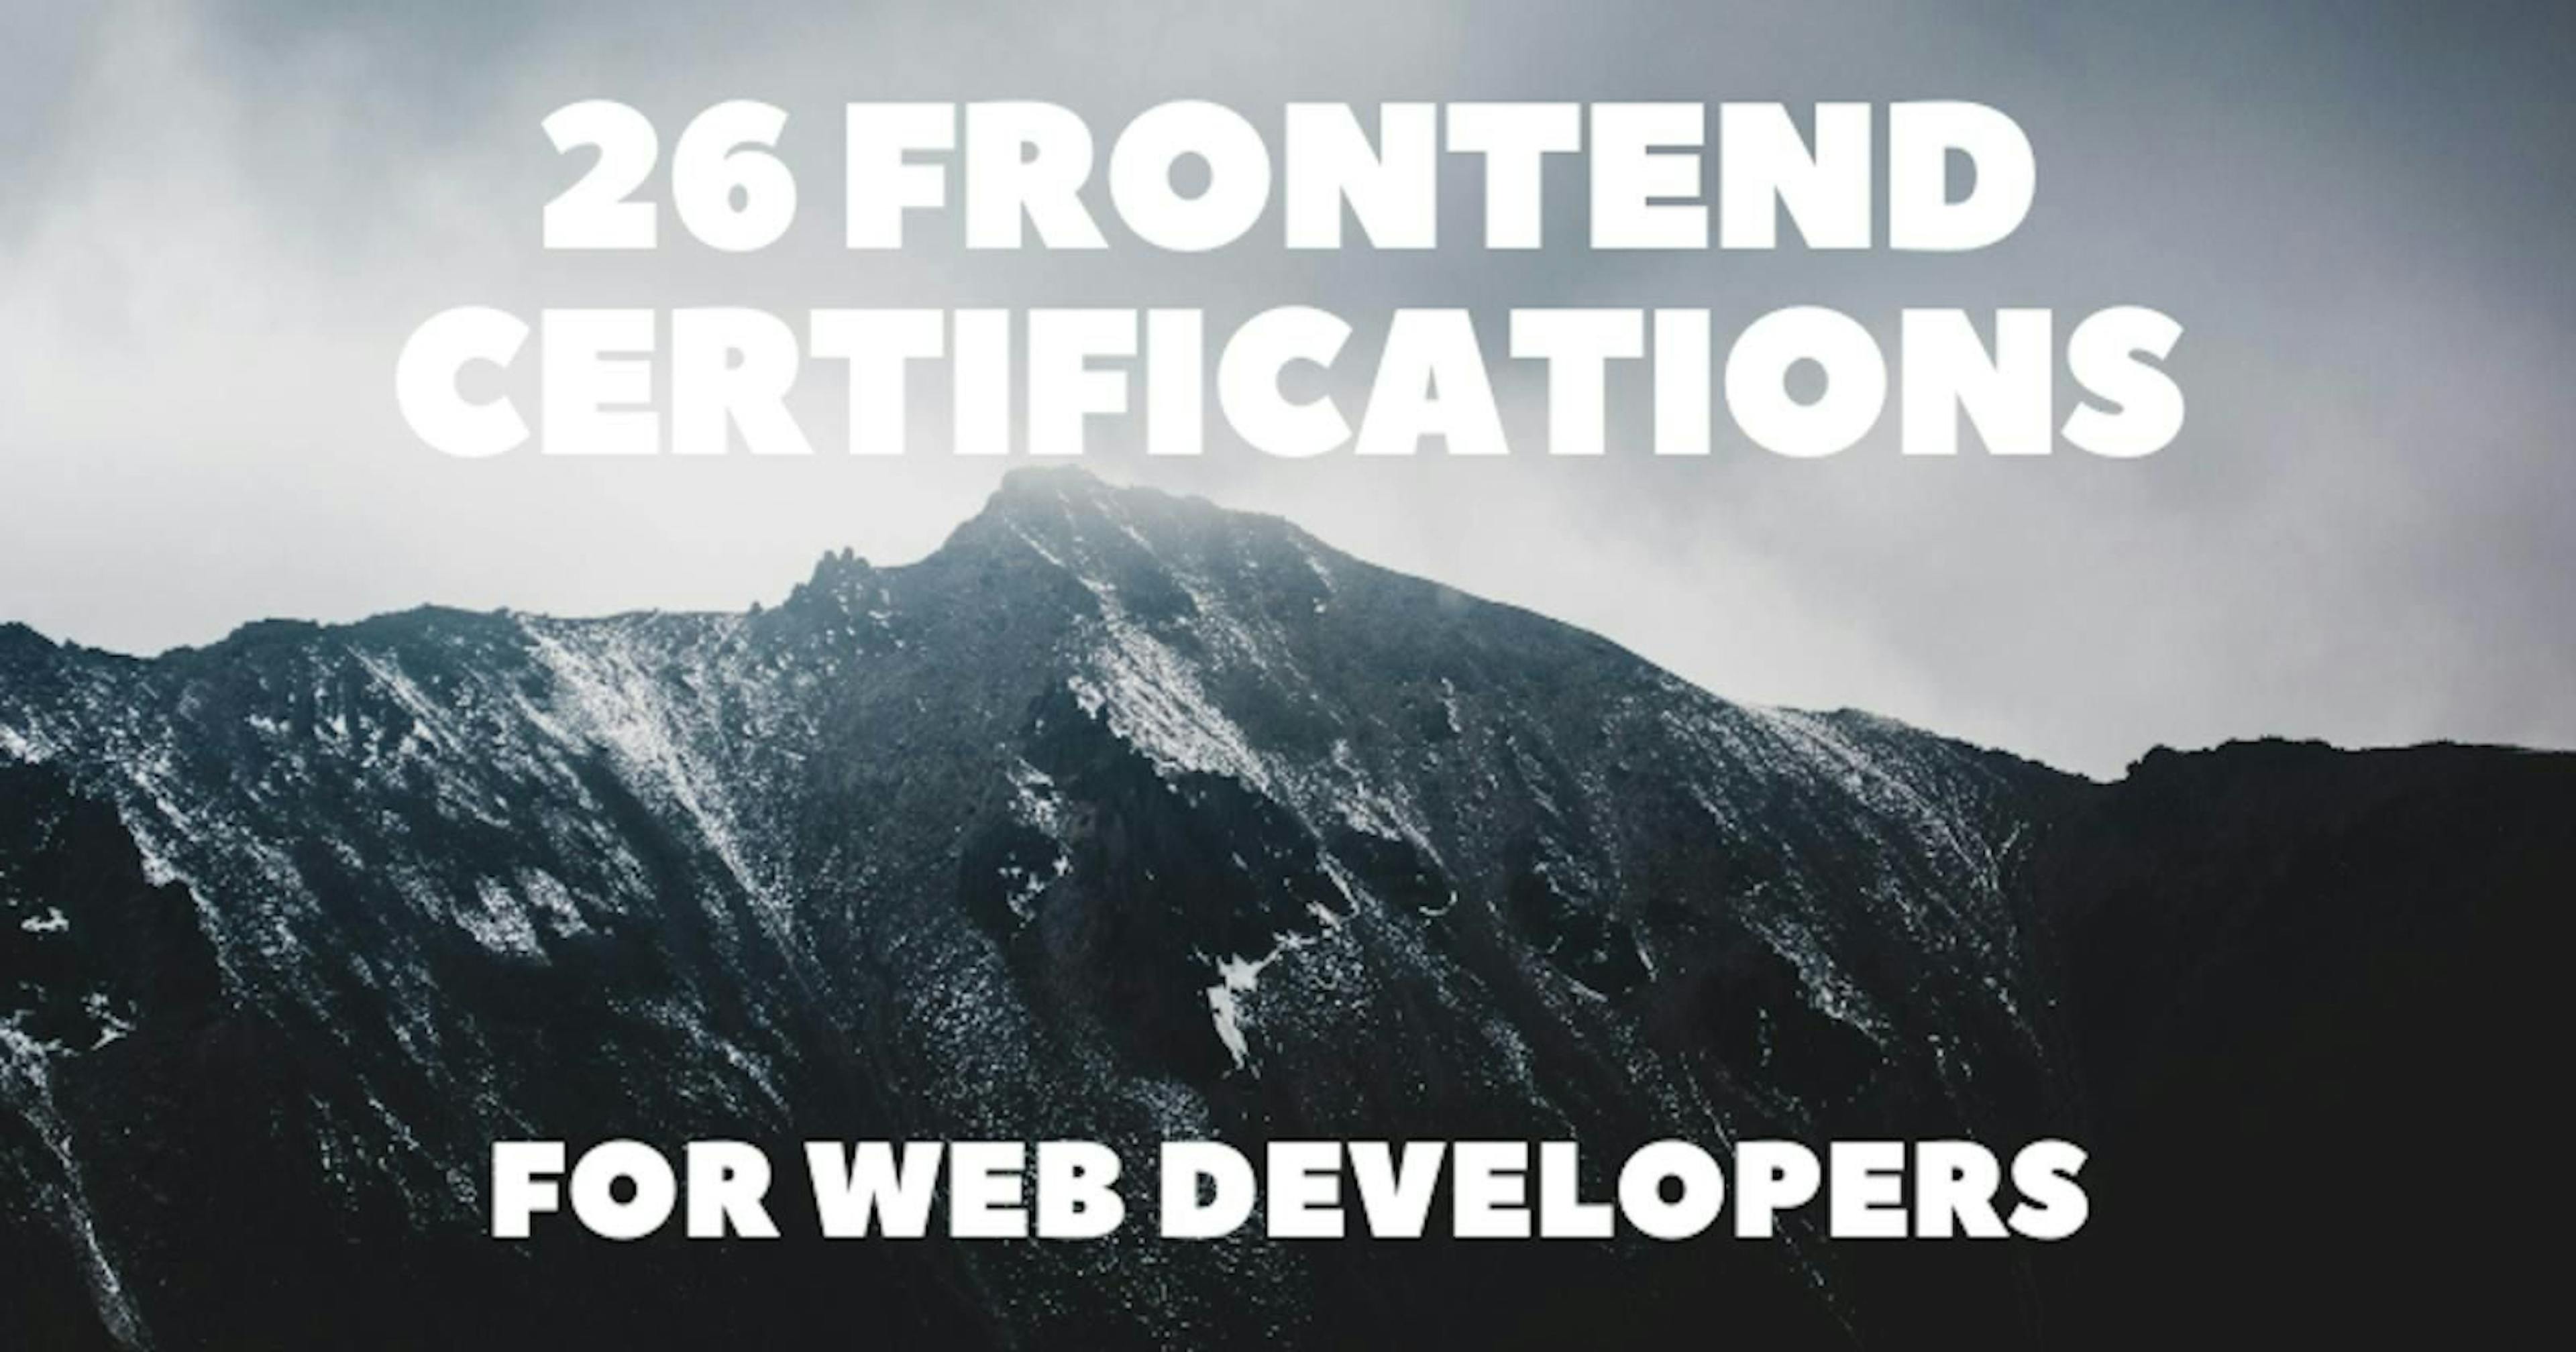 featured image - The 26 Frontend Certifications You Need to Go From a Good Web Developer to a GREAT Web Developer 🔥